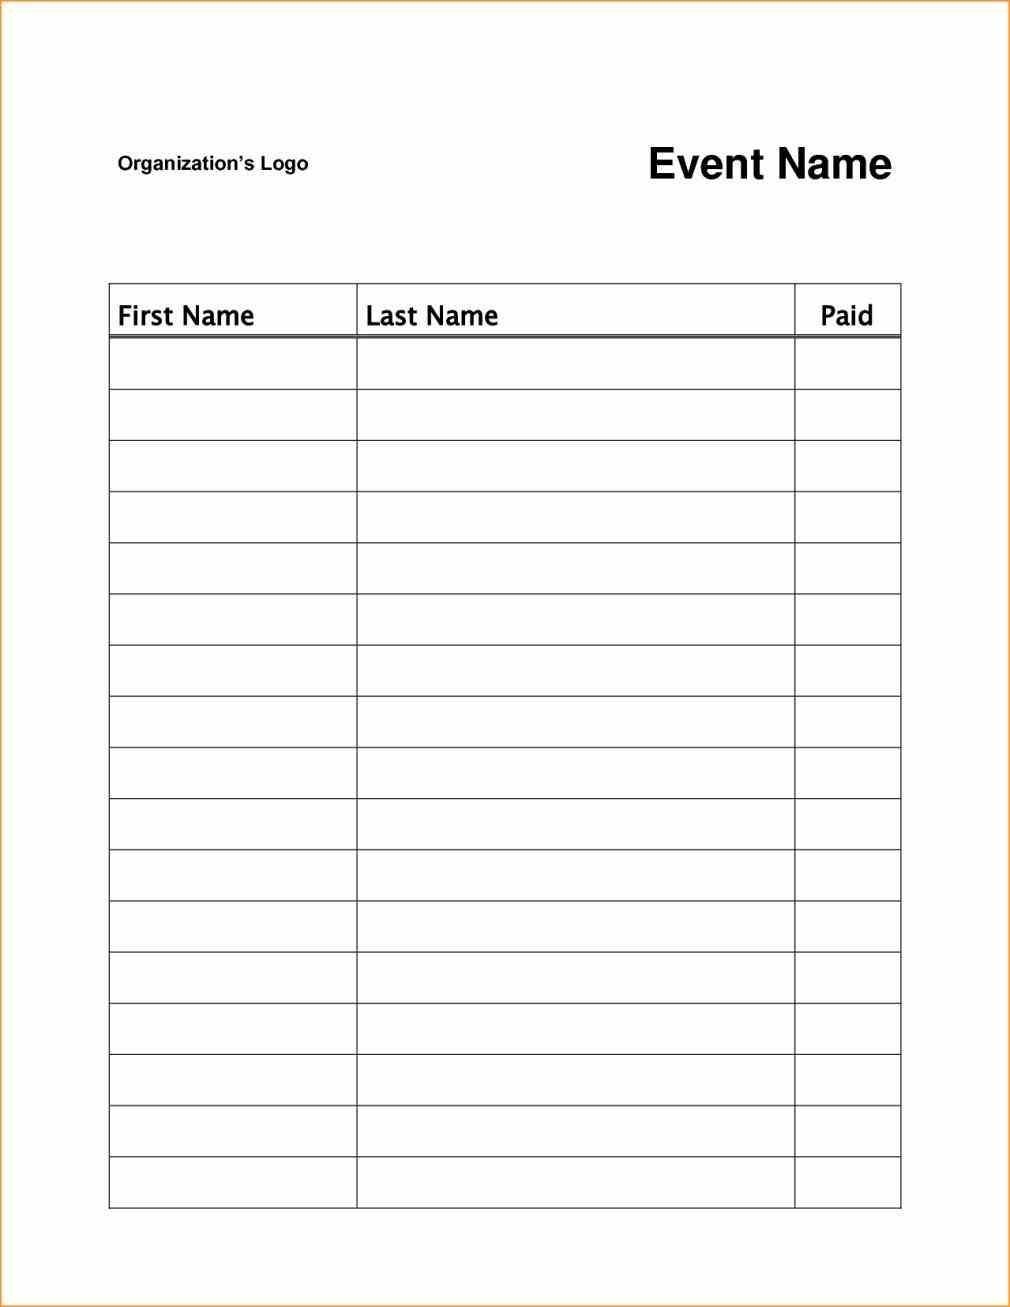 event or class workshop forms a sign up sheet template word